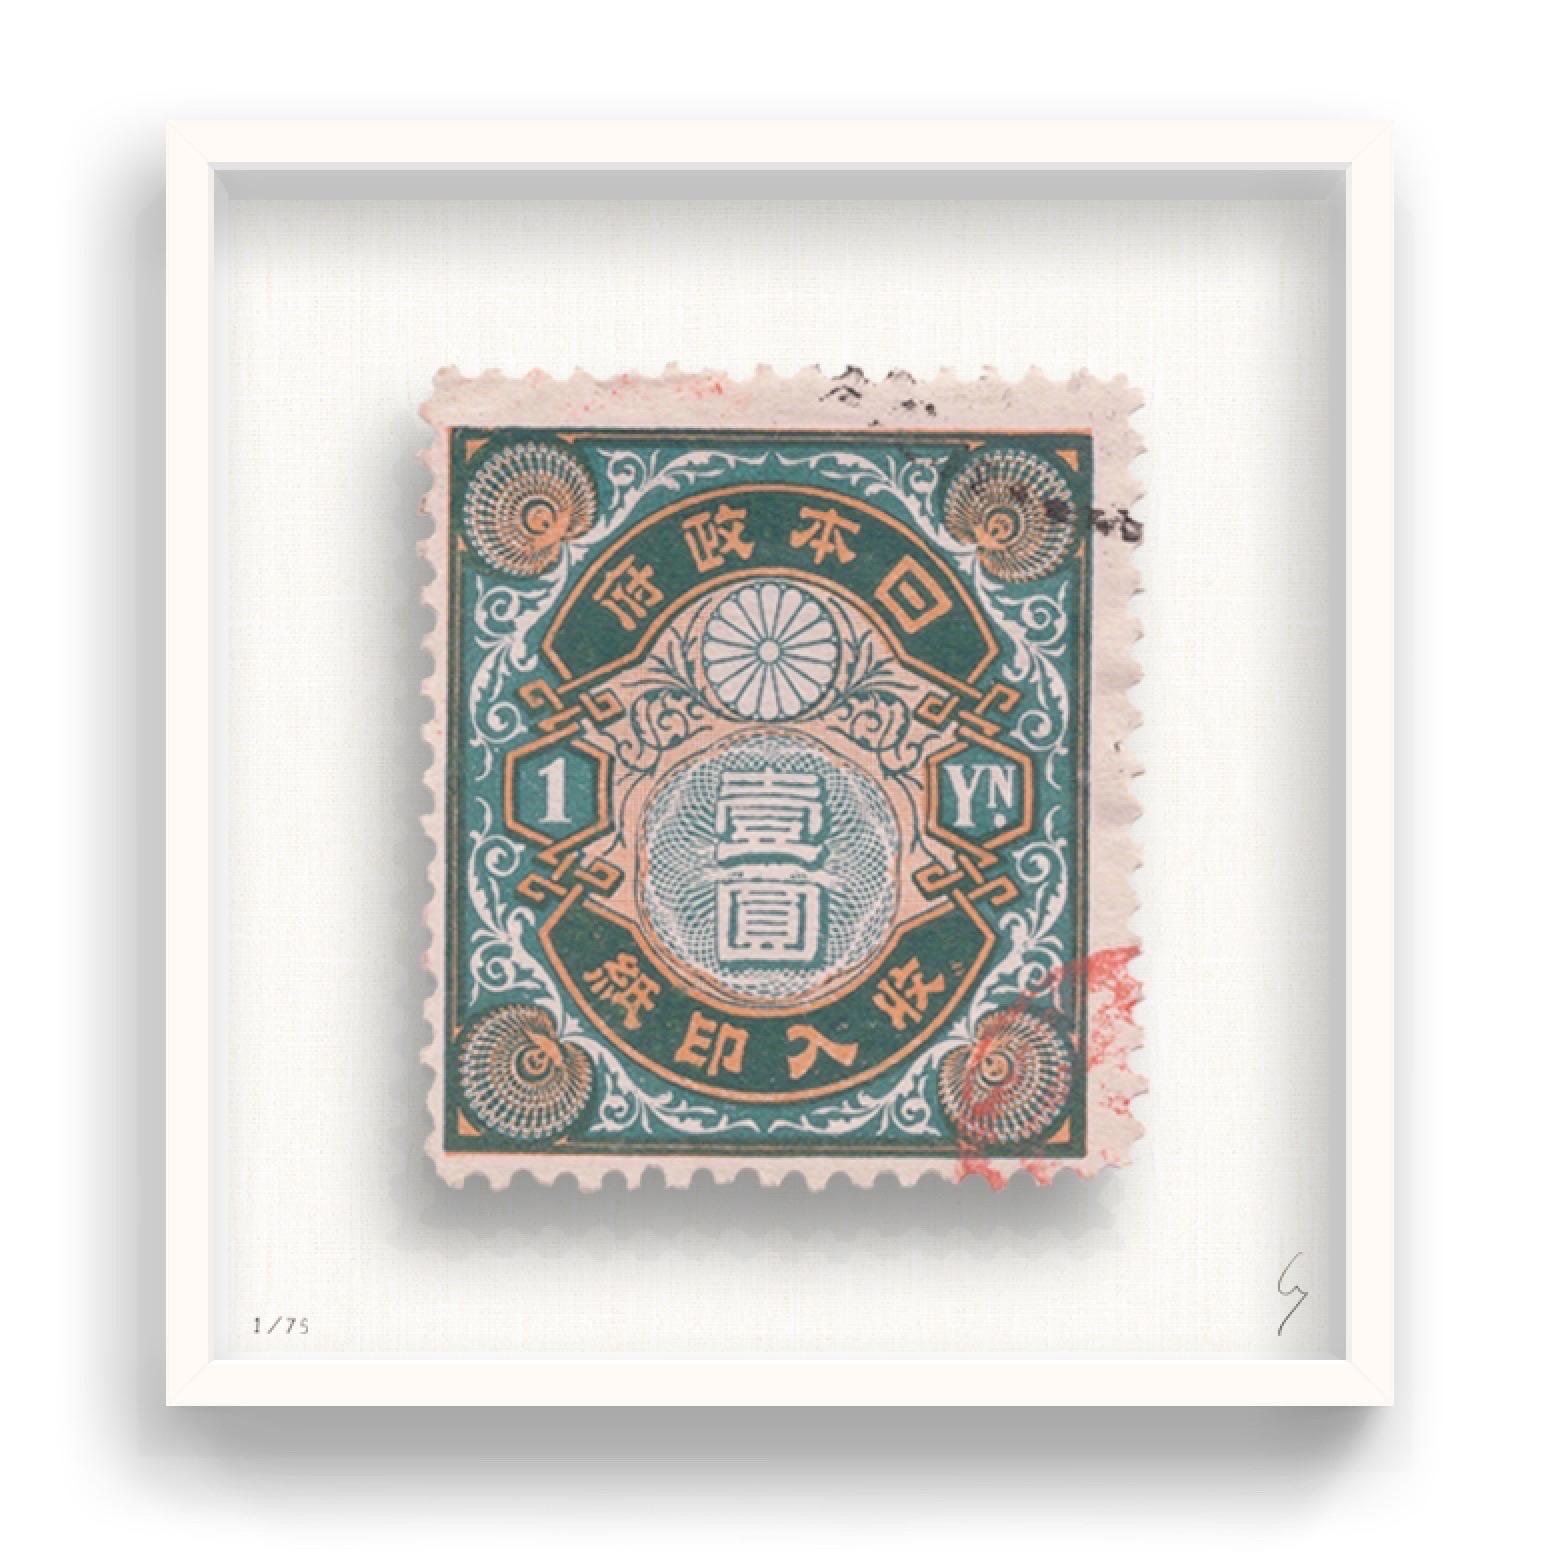 Guy Gee, Japan (medium)

Hand-engraved print on 350gsm on G.F Smith card
53 x 56cm (20 4/5 x 22 2/5 in)
Frame included 
Edition of 75 

Each artwork by Guy had been digitally reimagined from an original postage stamp. Cut out and finished by hand,